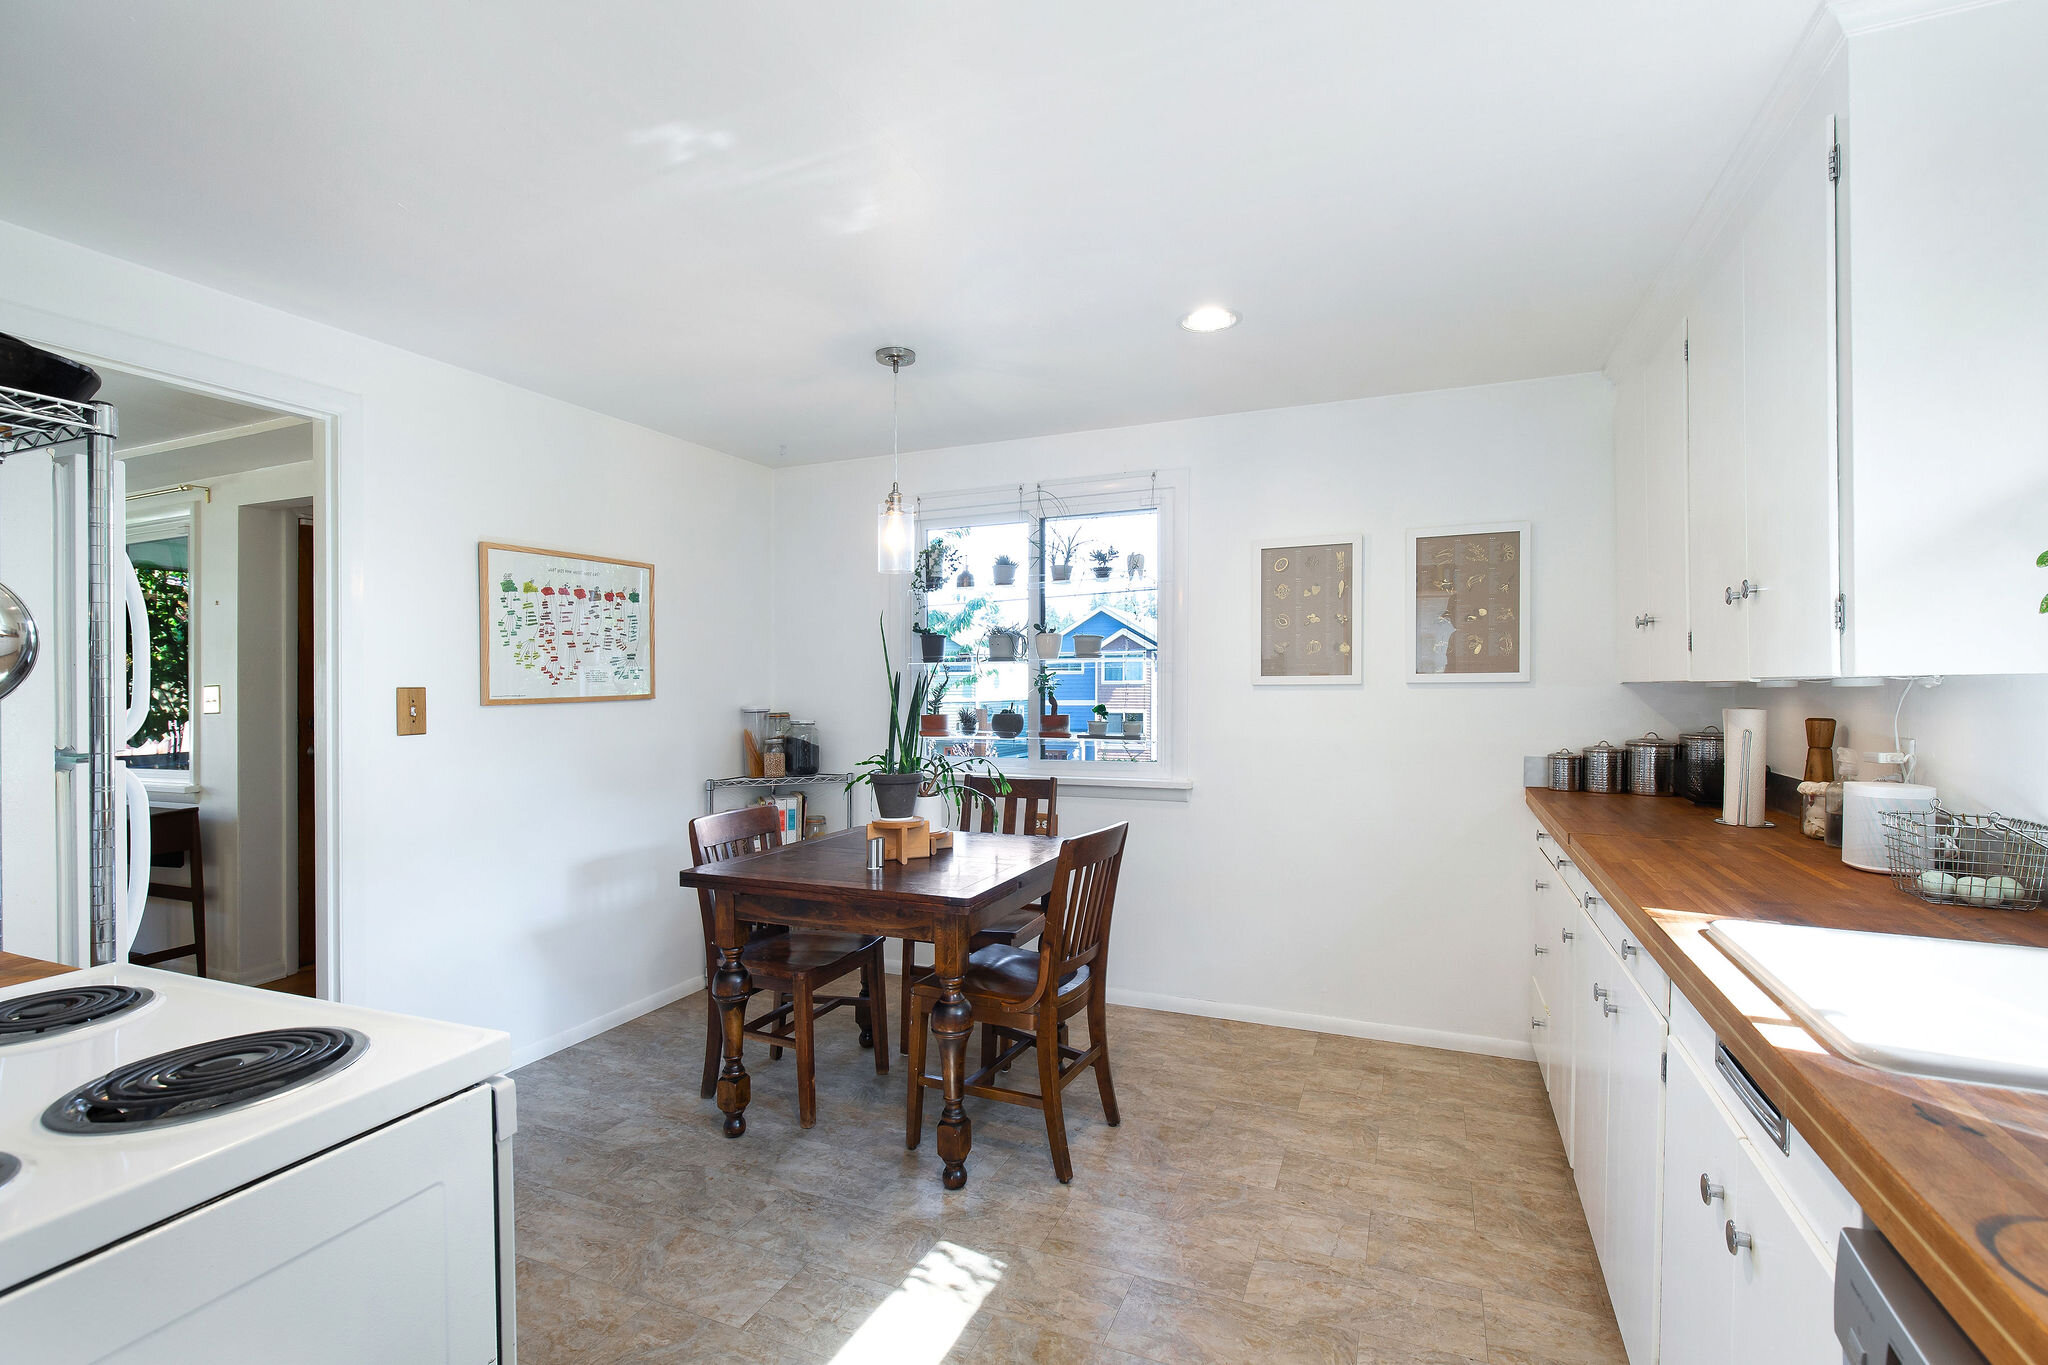  Plenty of room to fit a 4-person table for in-kitchen dining. 